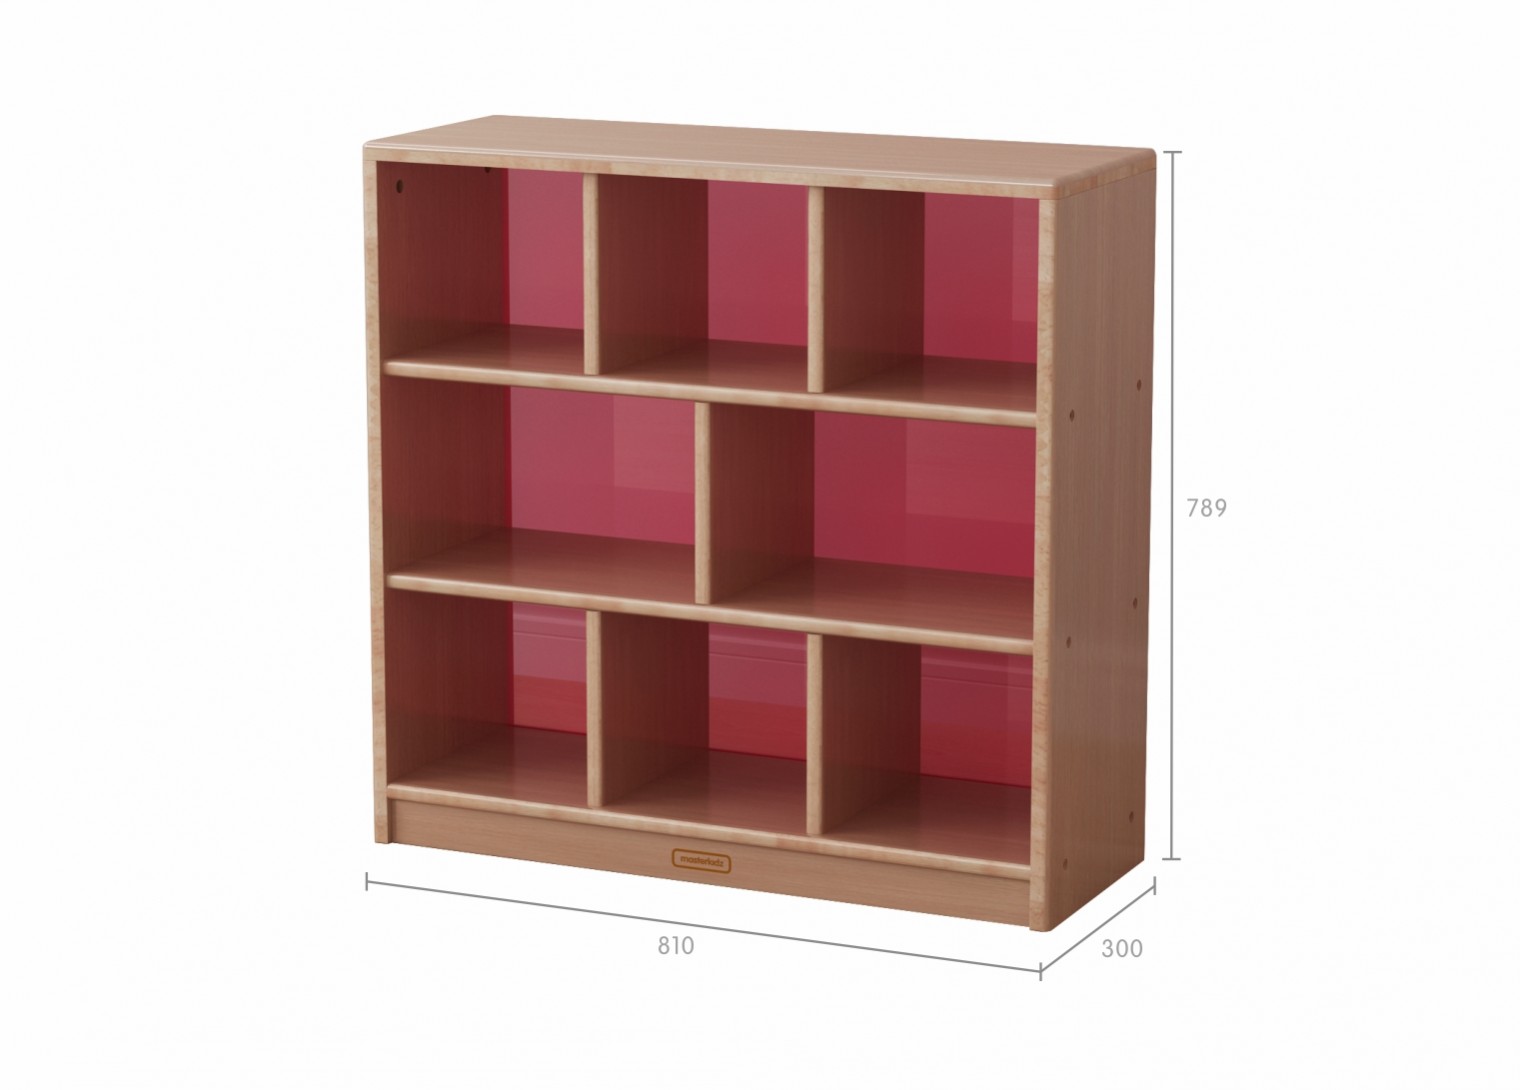 Forest School - 789H x 810L Wooden  8-Compartment Shelving Unit - Translucent Red Back